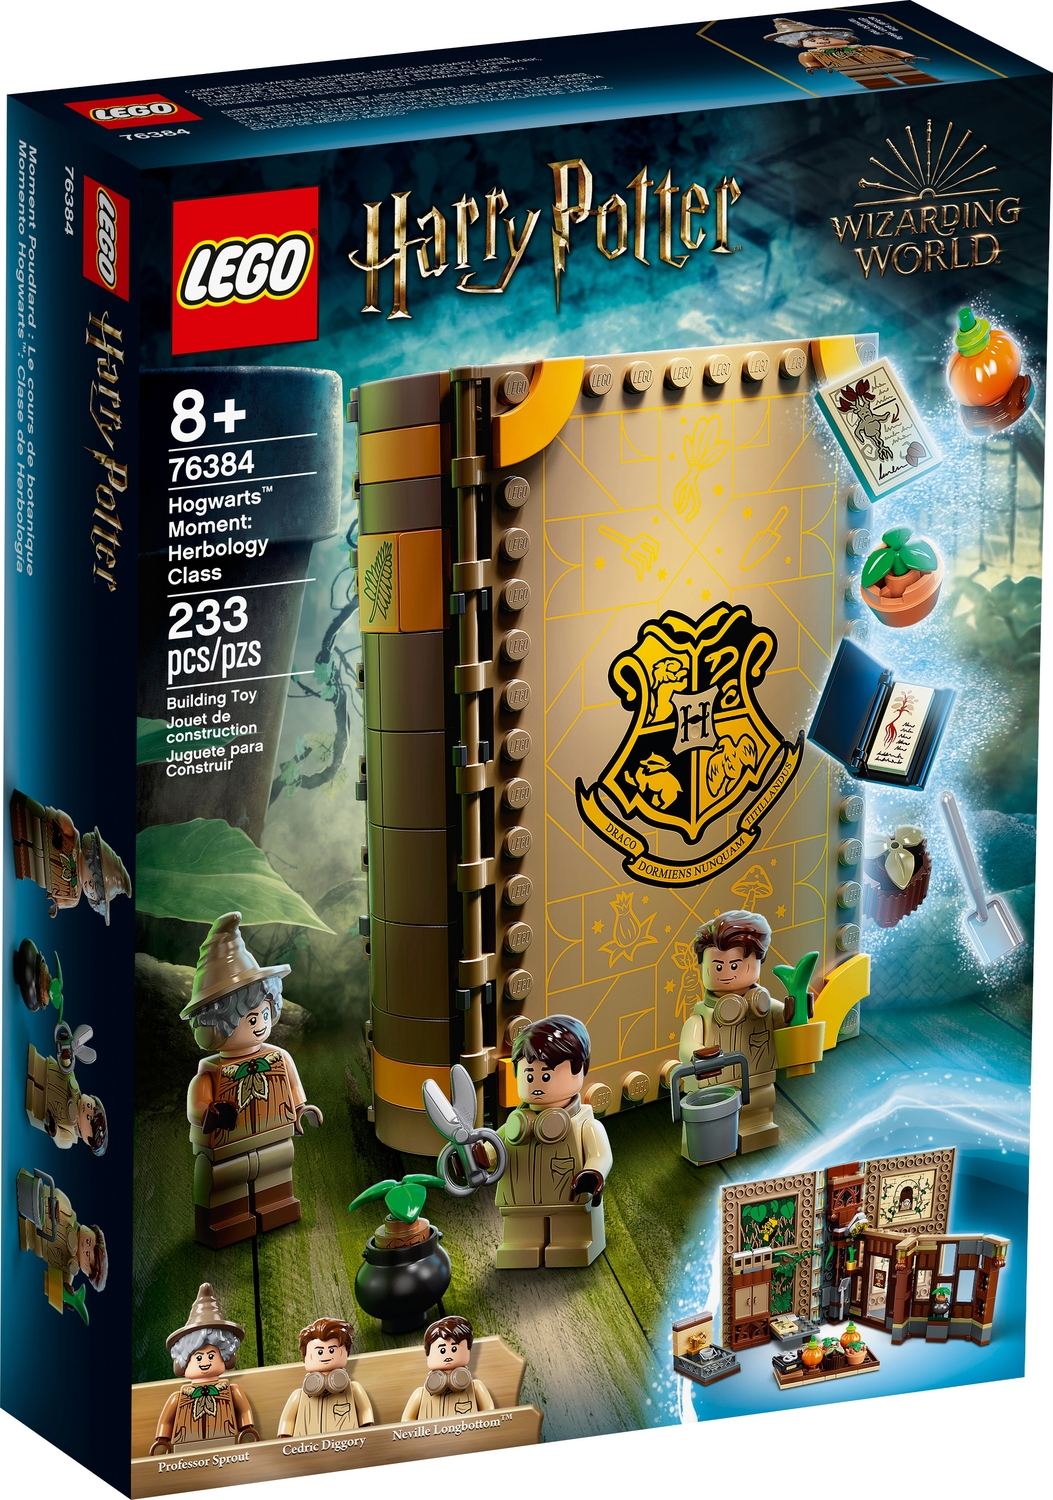 Combining the 2021 LEGO Harry Potter Hogwarts Moments Classrooms / Books 